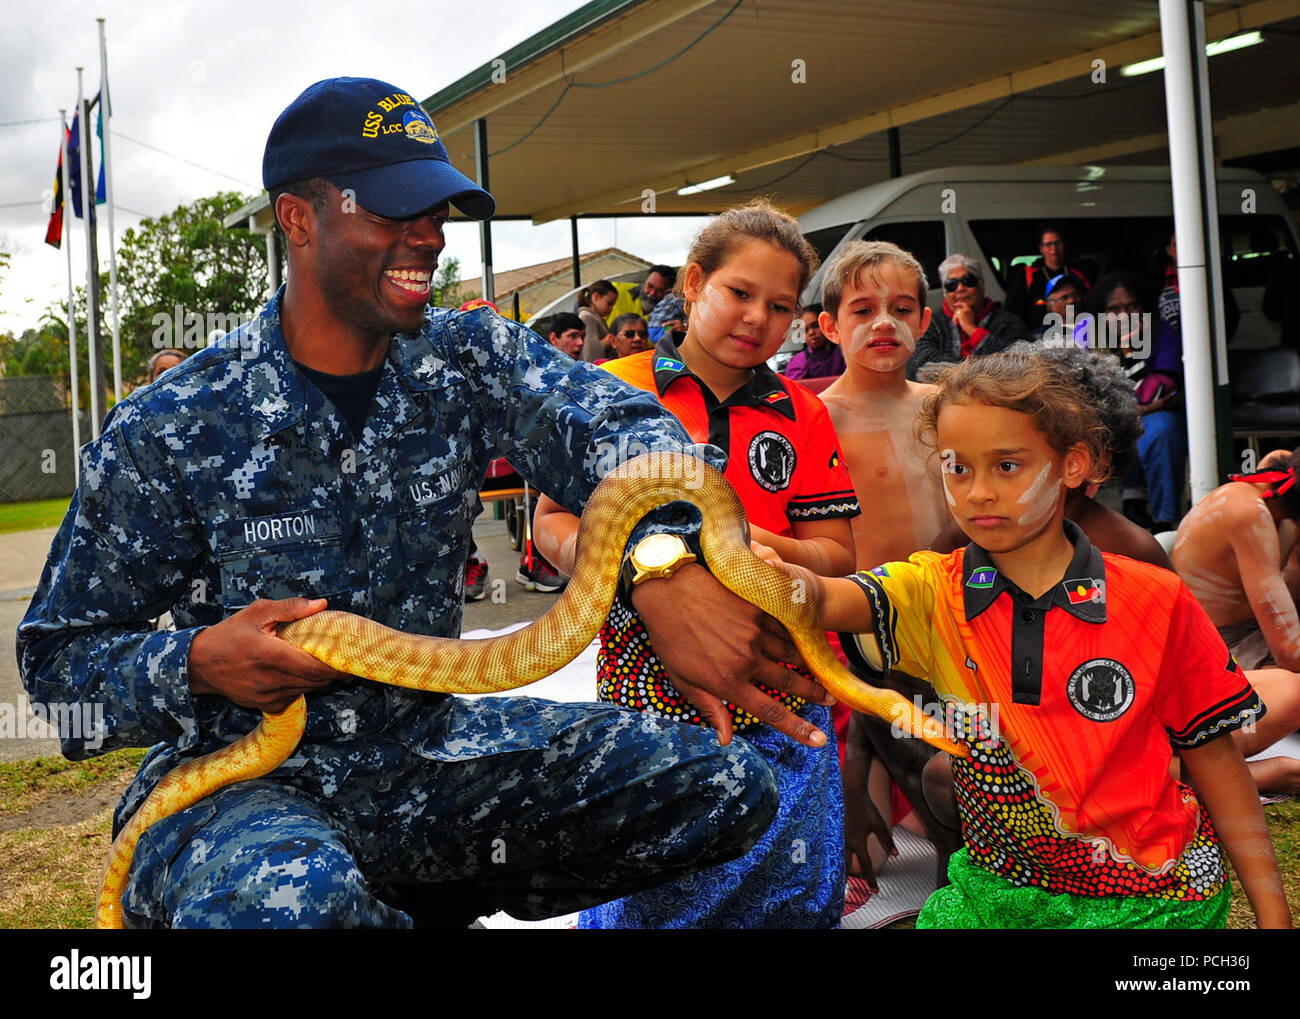 BRISBANE, Australia (July 21, 2015) Culinary Specialist 3rd Class Dearra Horton, assigned to the U.S. 7th Fleet flagship USS Blue Ridge (LCC 19), holds a snake to show students from the Aboriginal and Islander Independent Community School during a community service event at Burringilly Aboriginal Corporation. Blue Ridge is conducting a port visit in Brisbane while patrolling the 7th Fleet area of operations. Stock Photo